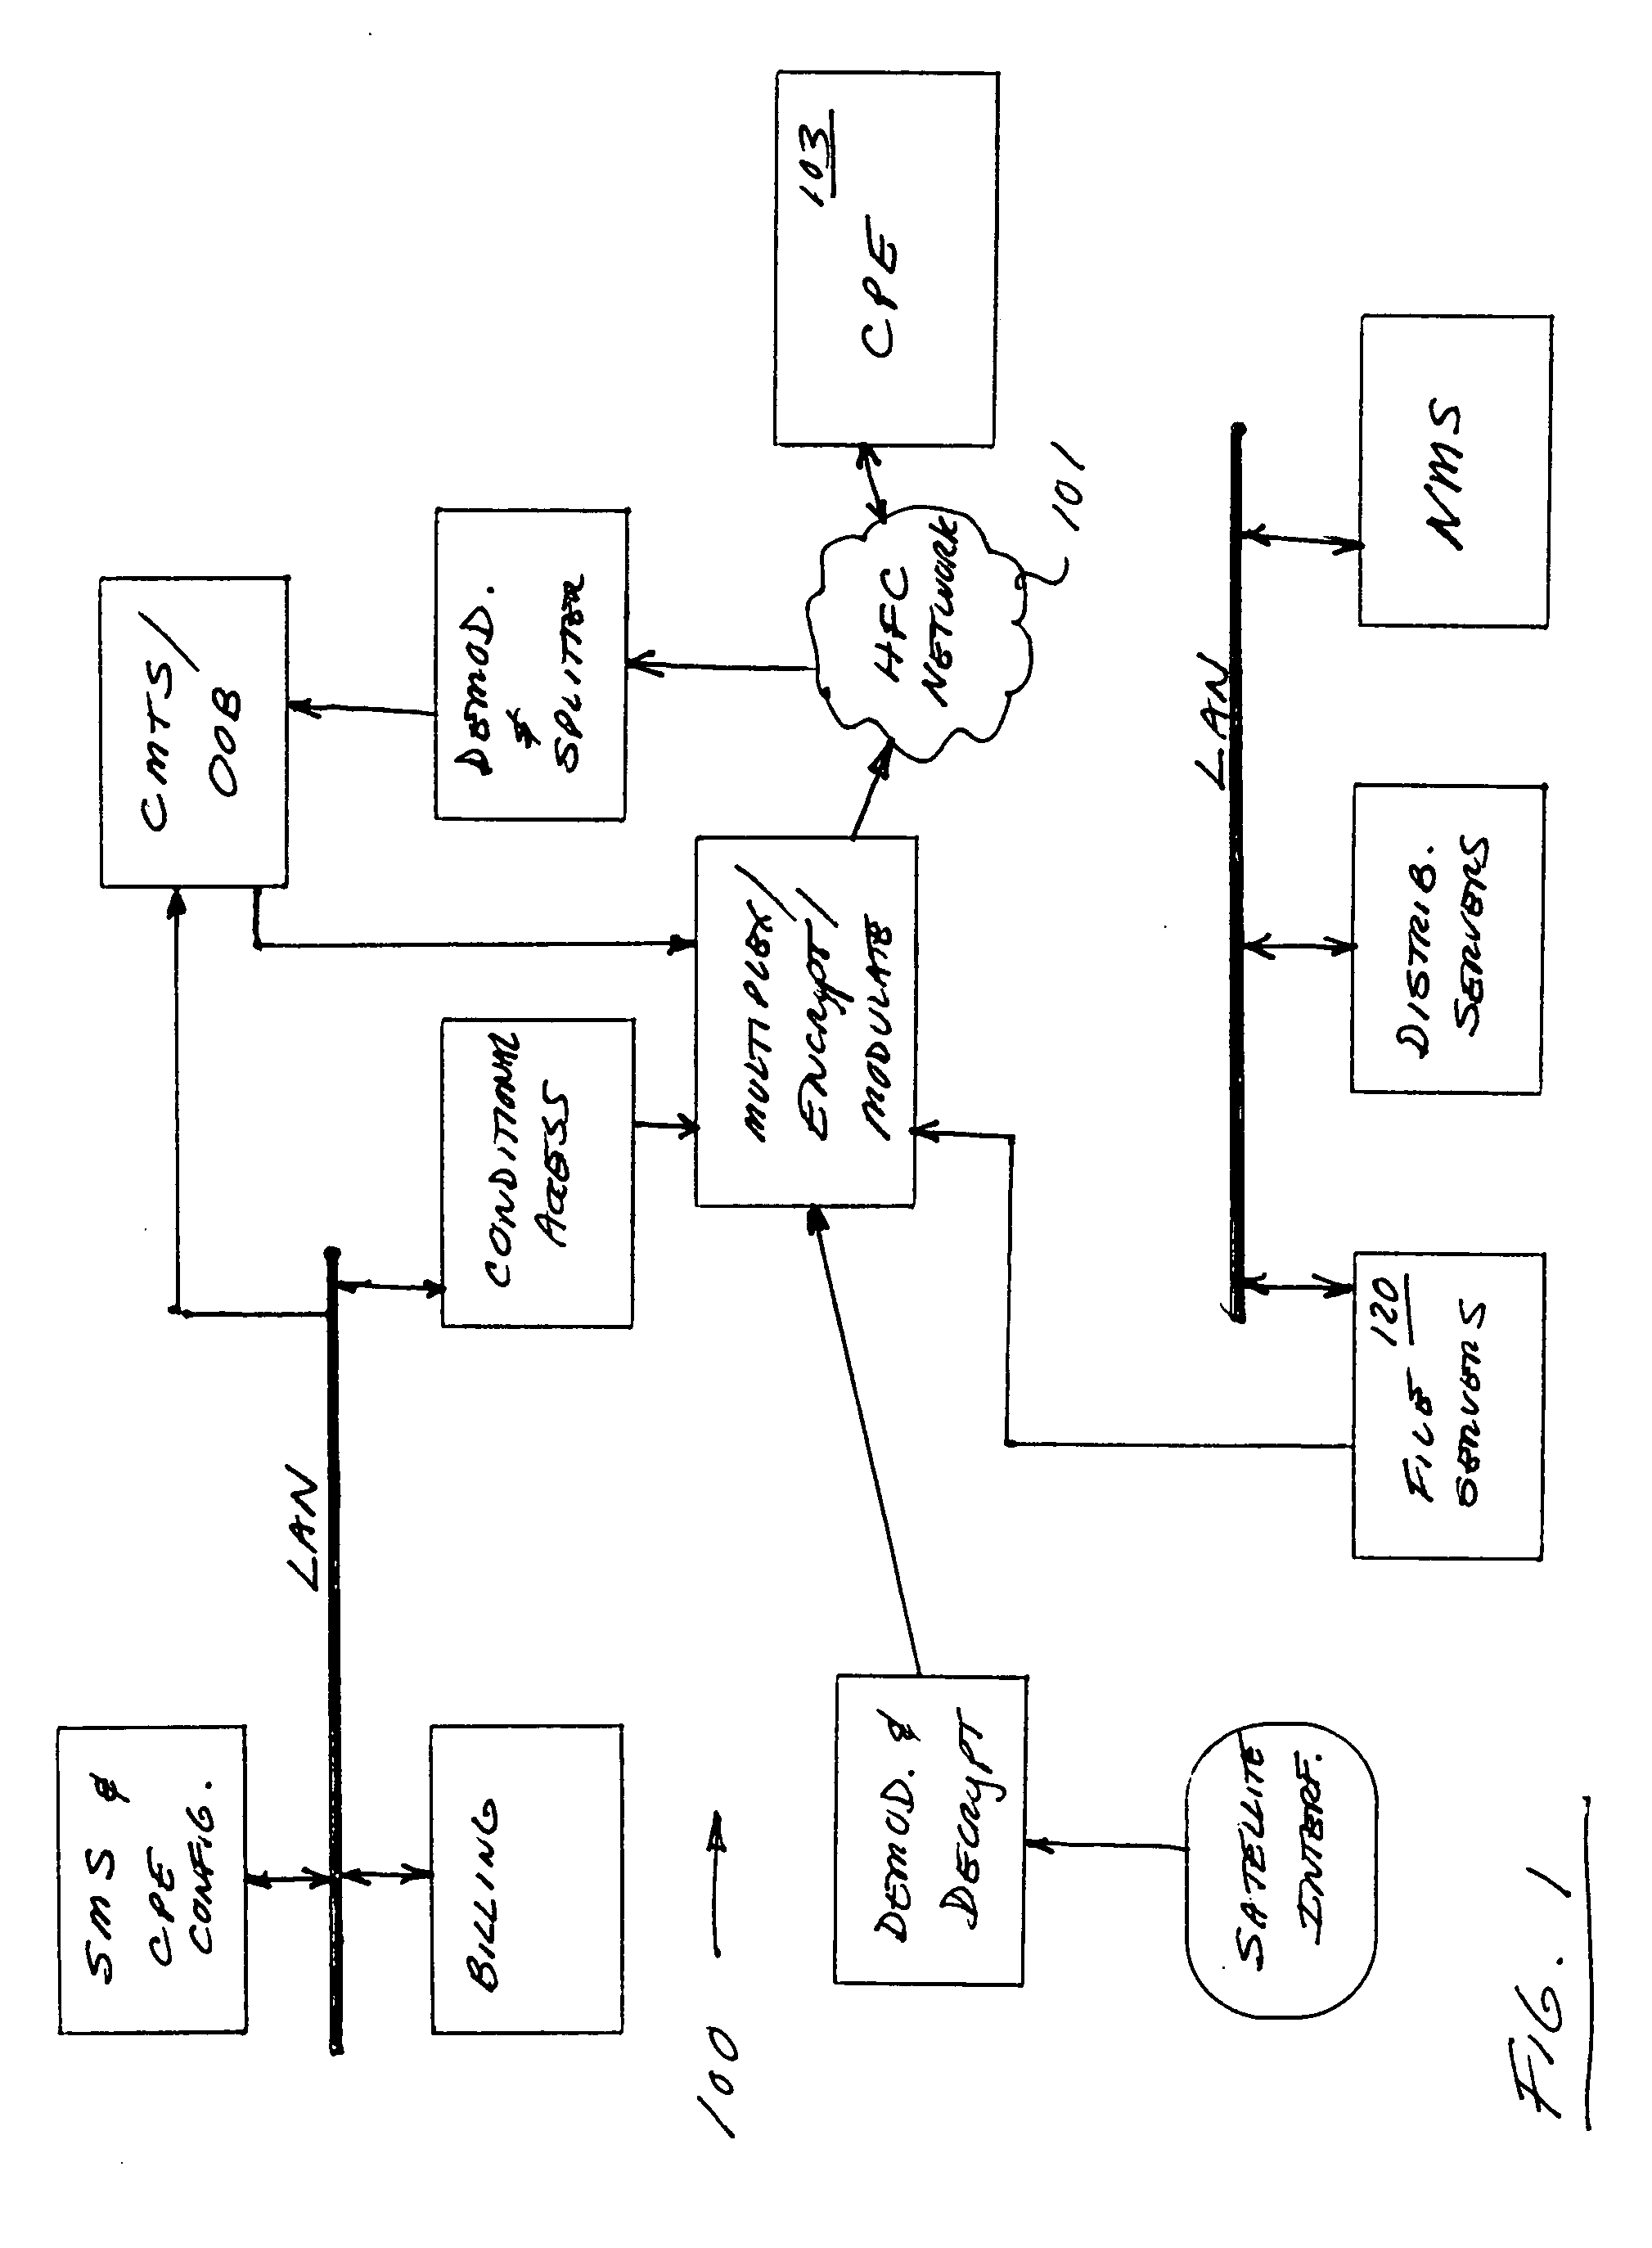 Scheduling trigger apparatus and method